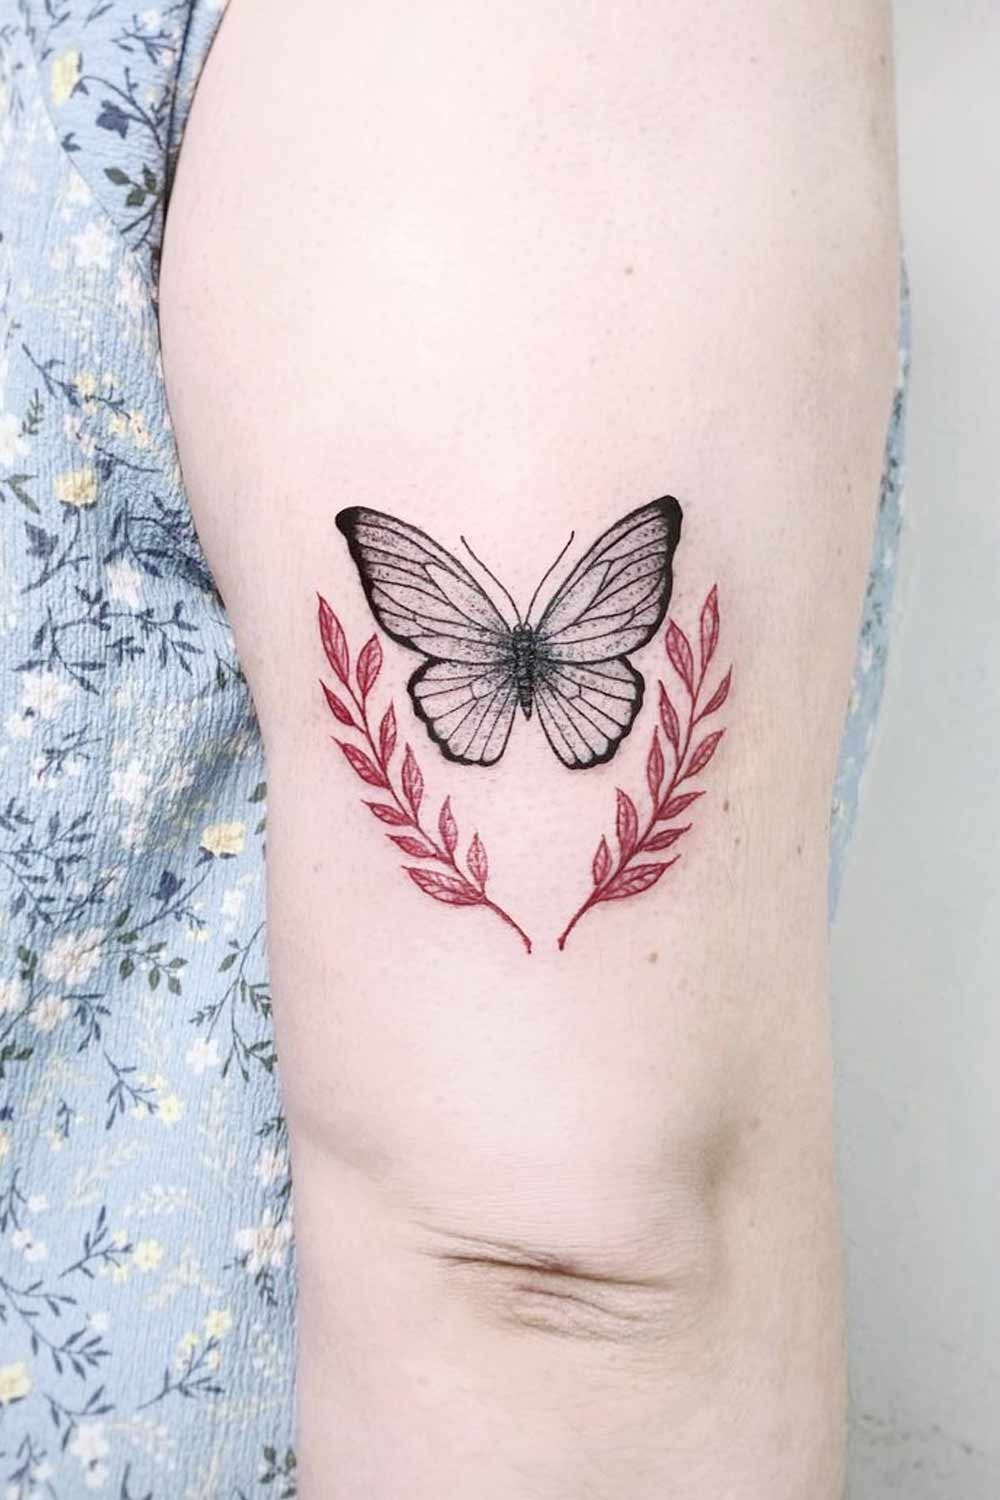 Meaning and Symbolism of Butterfly Tattoo